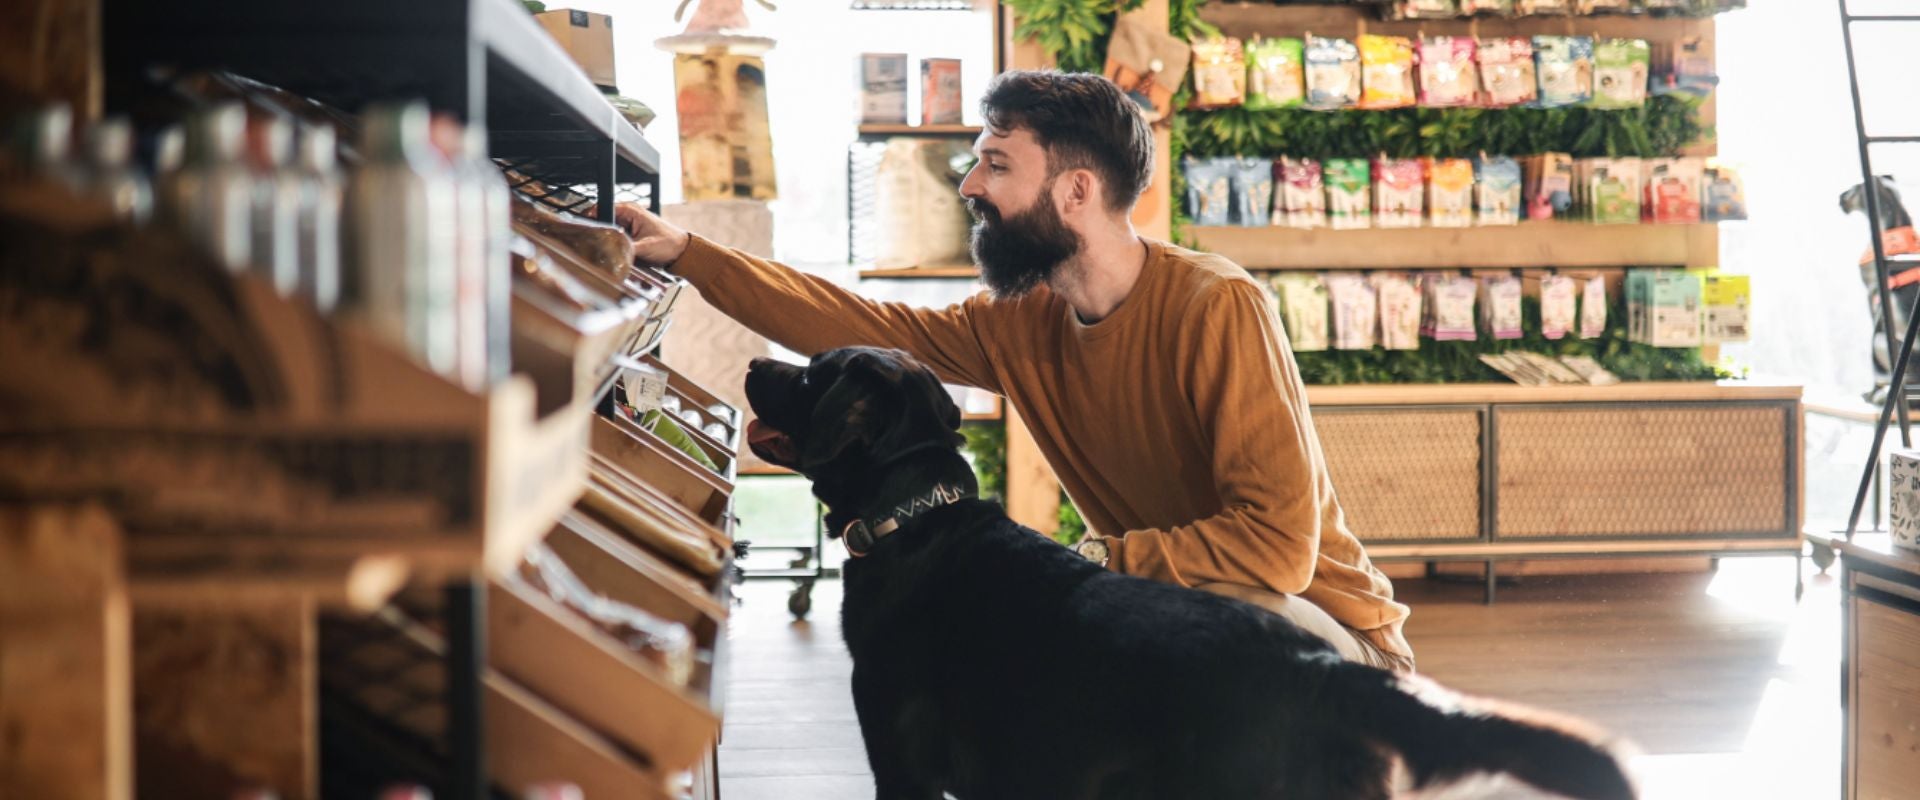 person shopping with pet dog